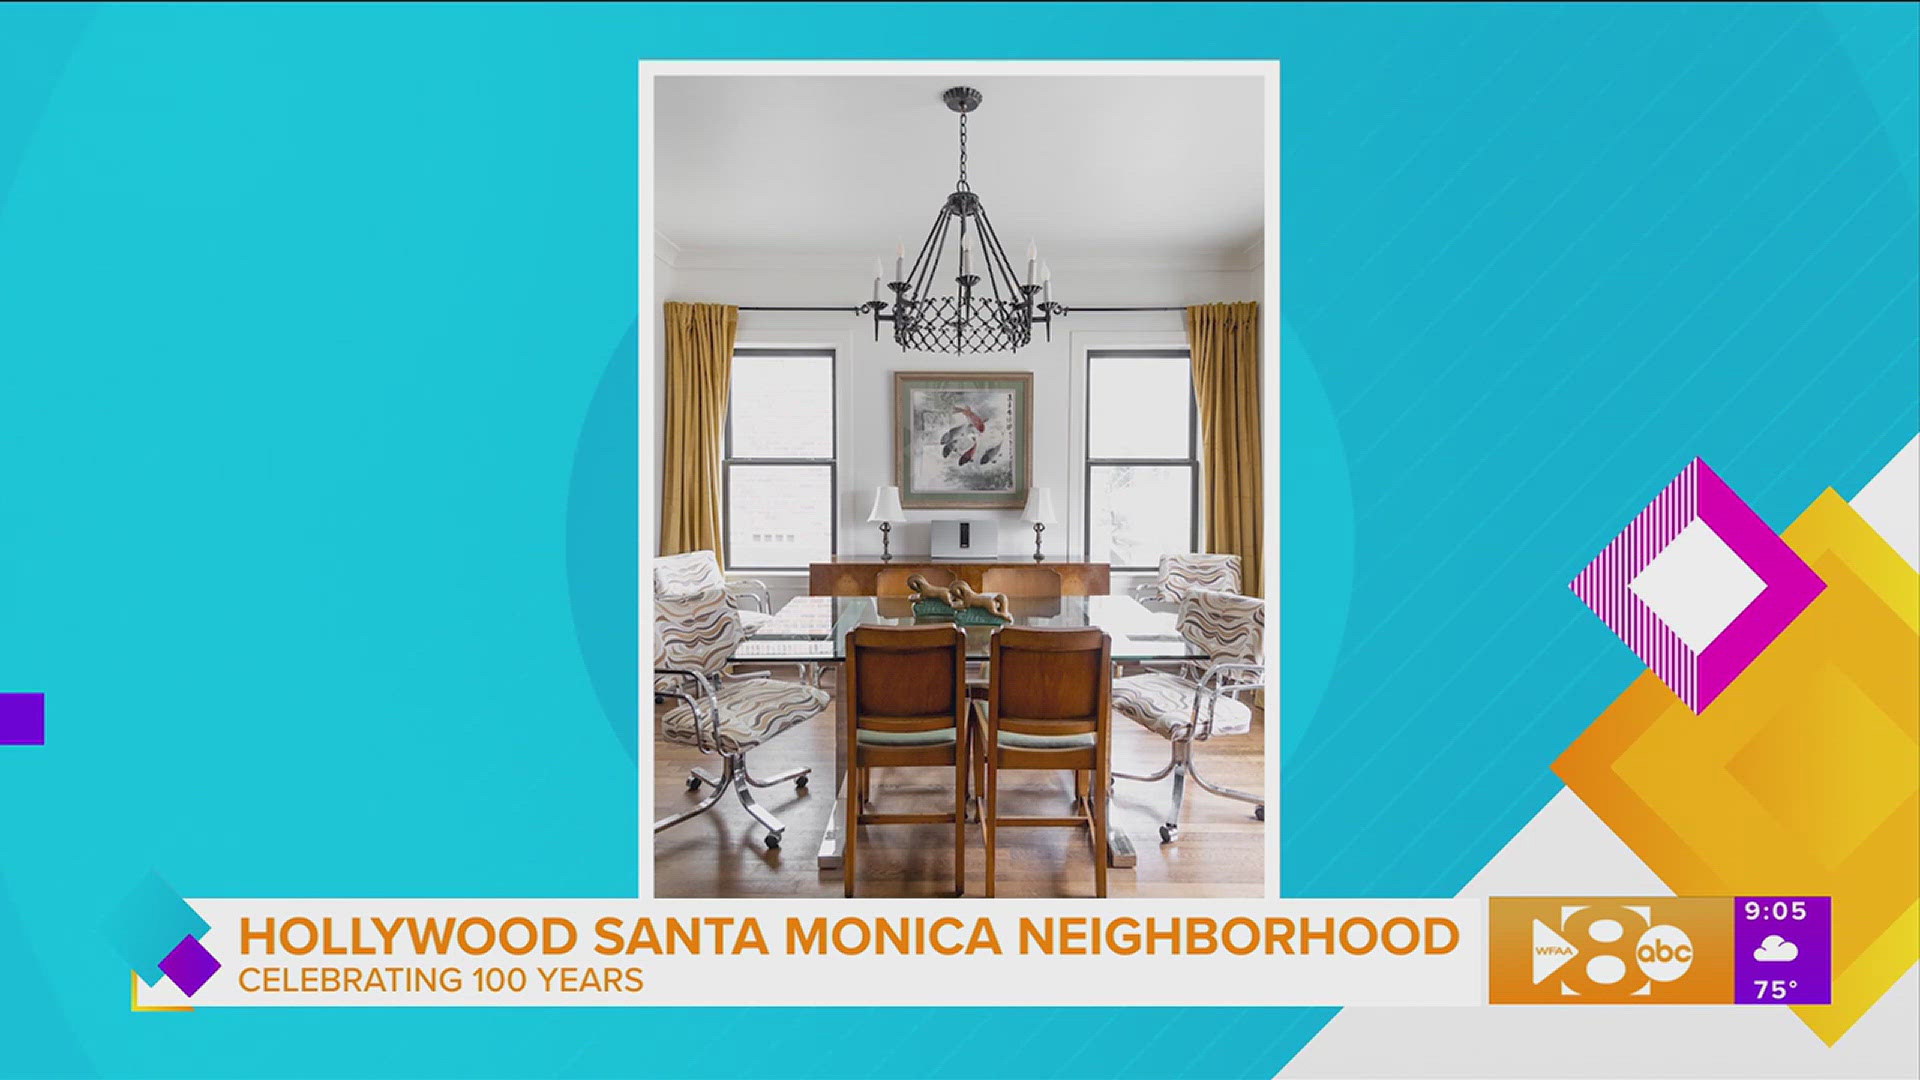 Paige gives us a look at the historic homes of the Hollywood Heights and Santa Monica Neighborhood as they celebrate 100 years.